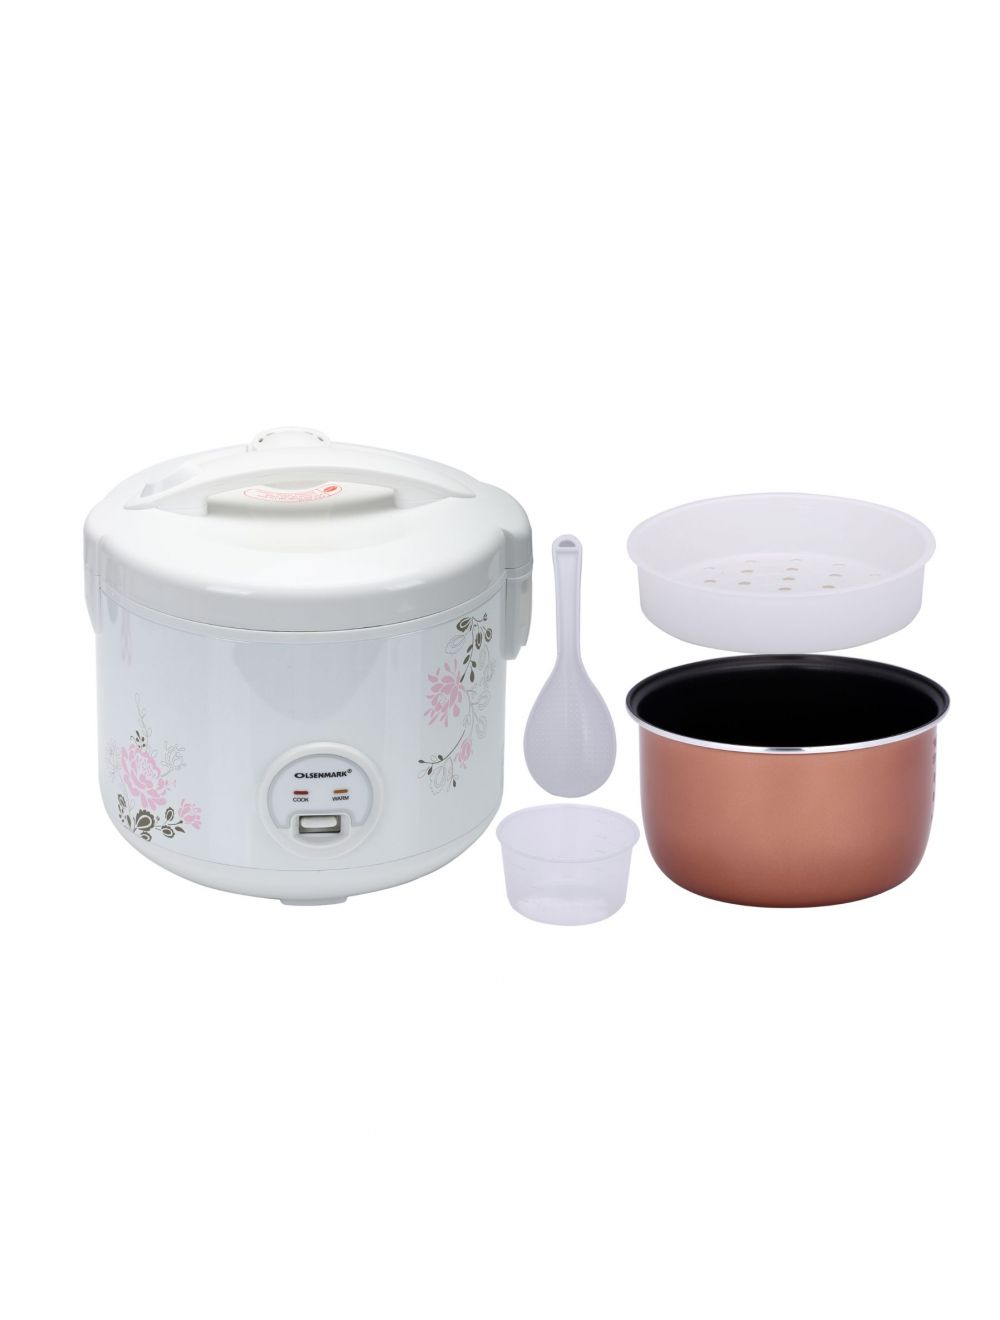 Olsenmark Rice Cooker, 1.5L | 3 In 1 - Automatic Cooking and Warning System